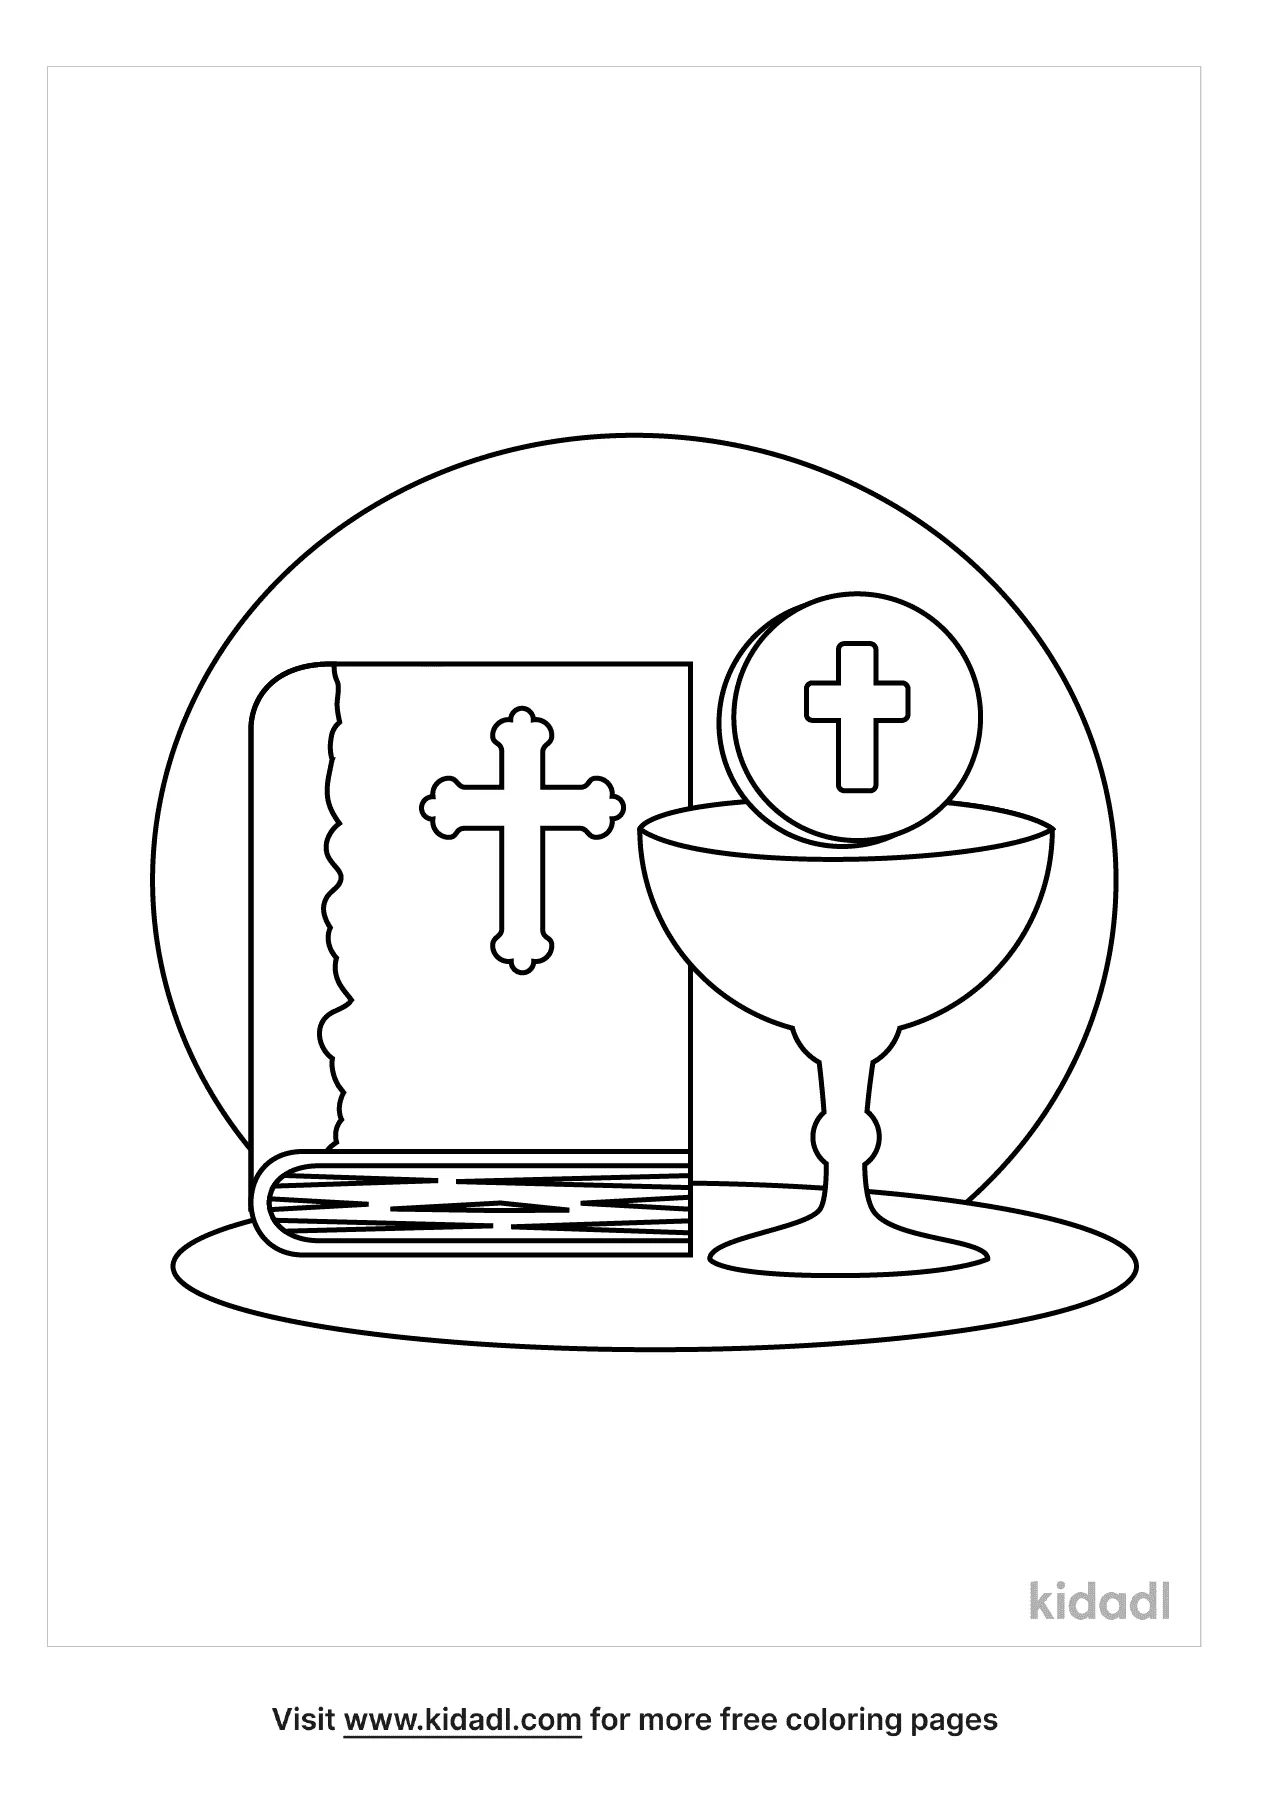 eucharist coloring pages free